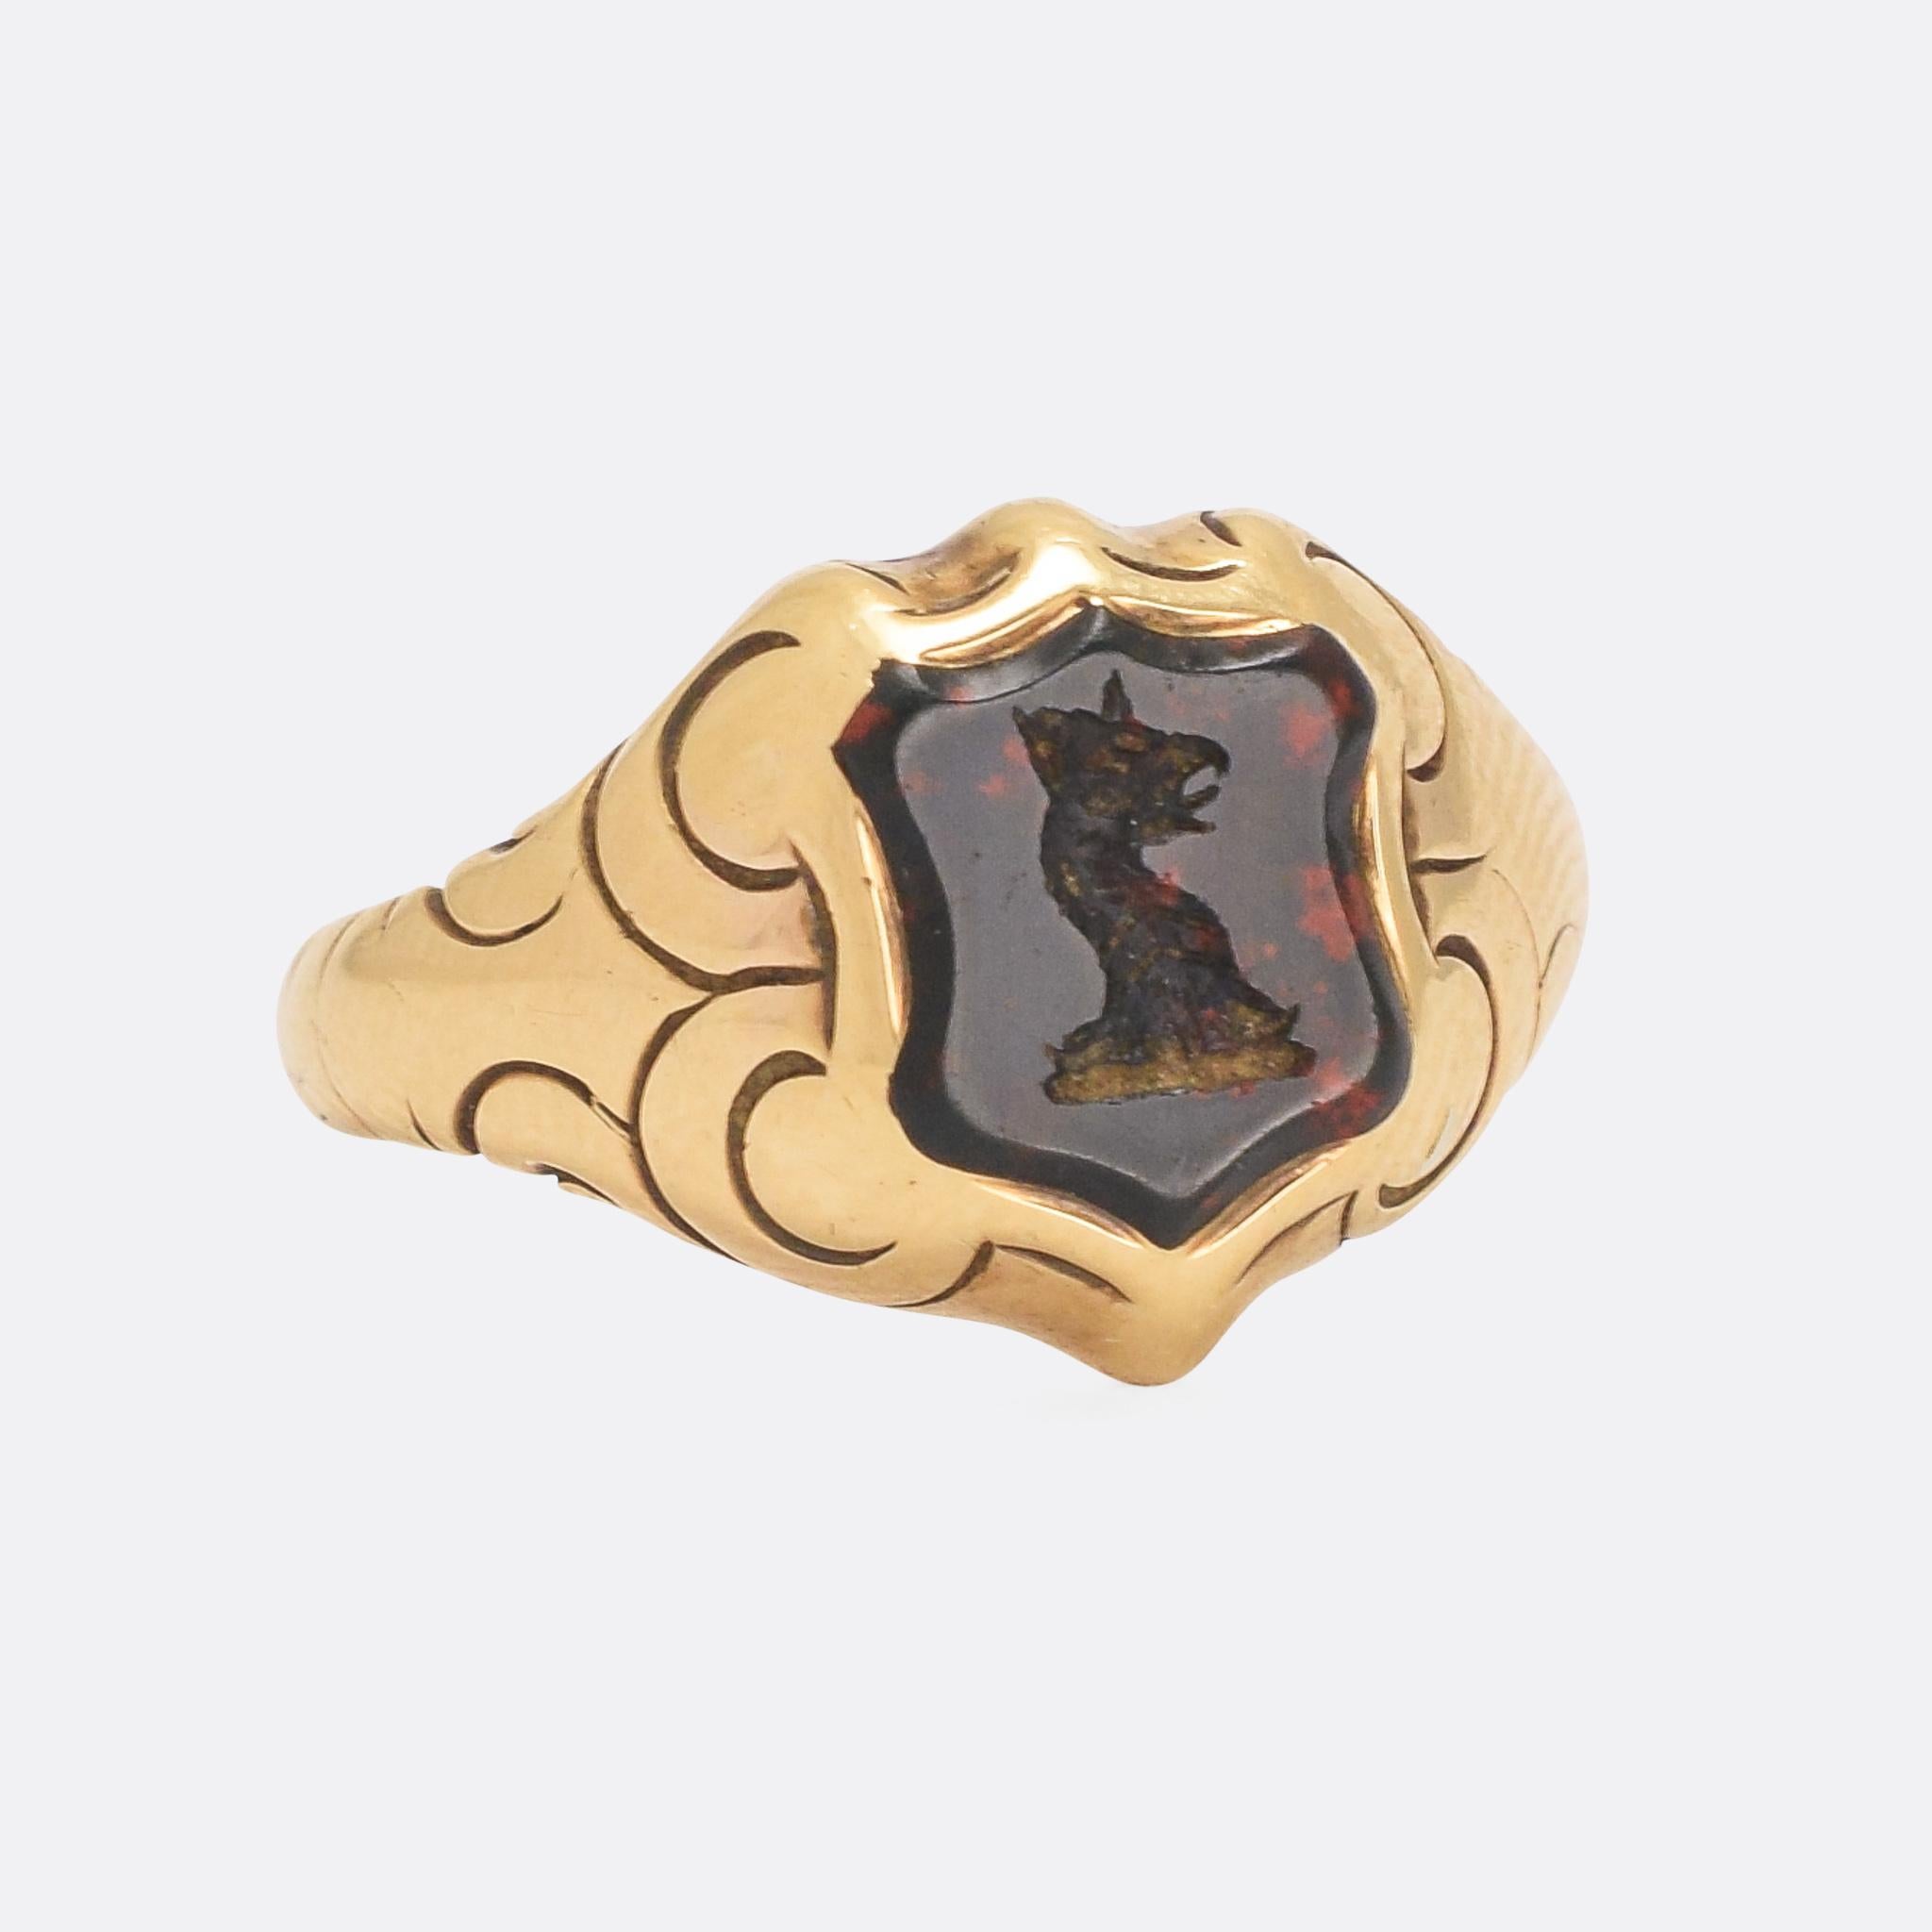 The coolest antique signet ring we've had in ages. The shield shape bloodstone crest shows impeccable colour - deep jet black with vivid flecks of blood red - and has been carved with an intaglio crest. The creature depicted is a Griffin; a